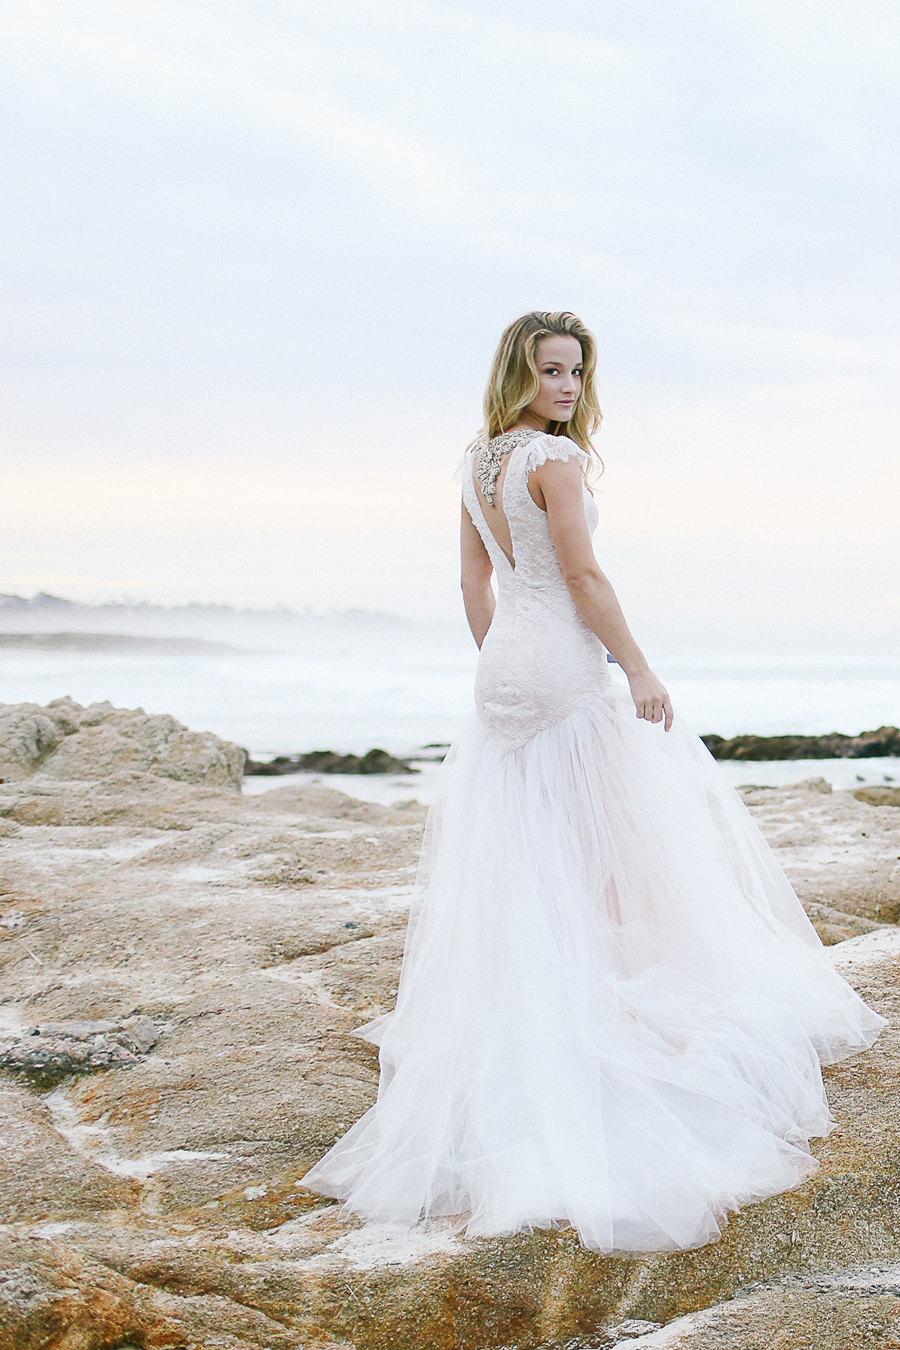 Mariage - Tulle wedding dress, wedding gown, lace dress, beach wedding, glamorous and sexy, sleeves, fit and flare gown for untraditional brides